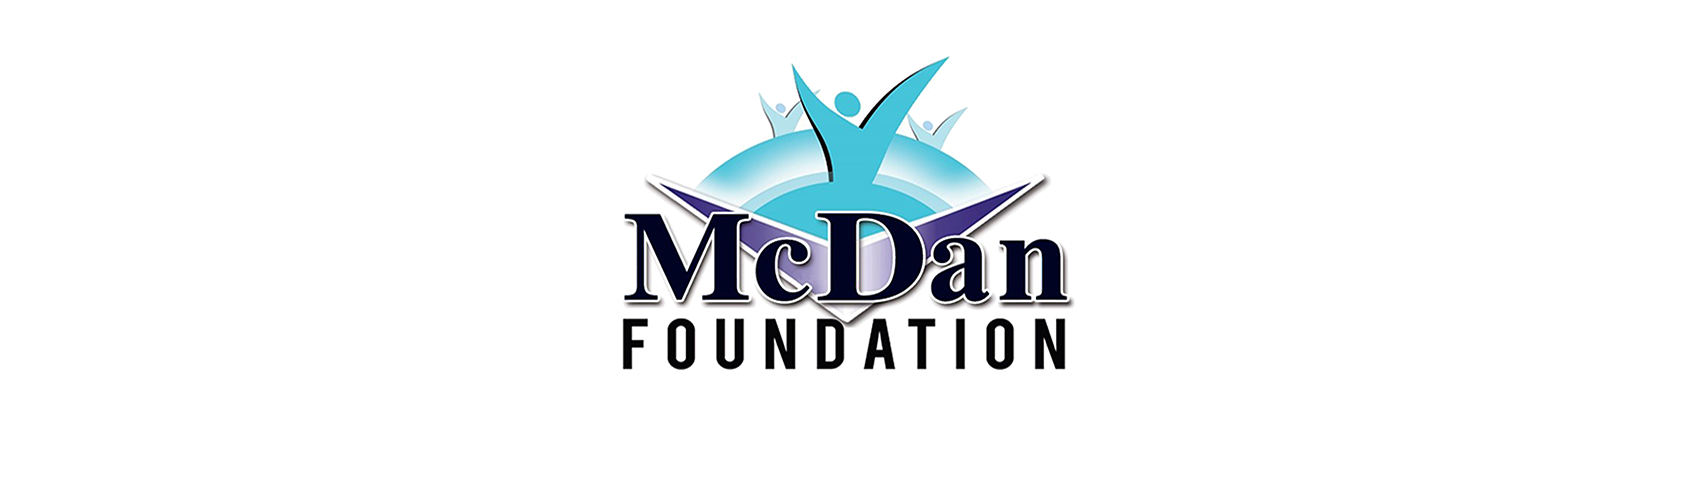 Welcome to Mcdan Foundation